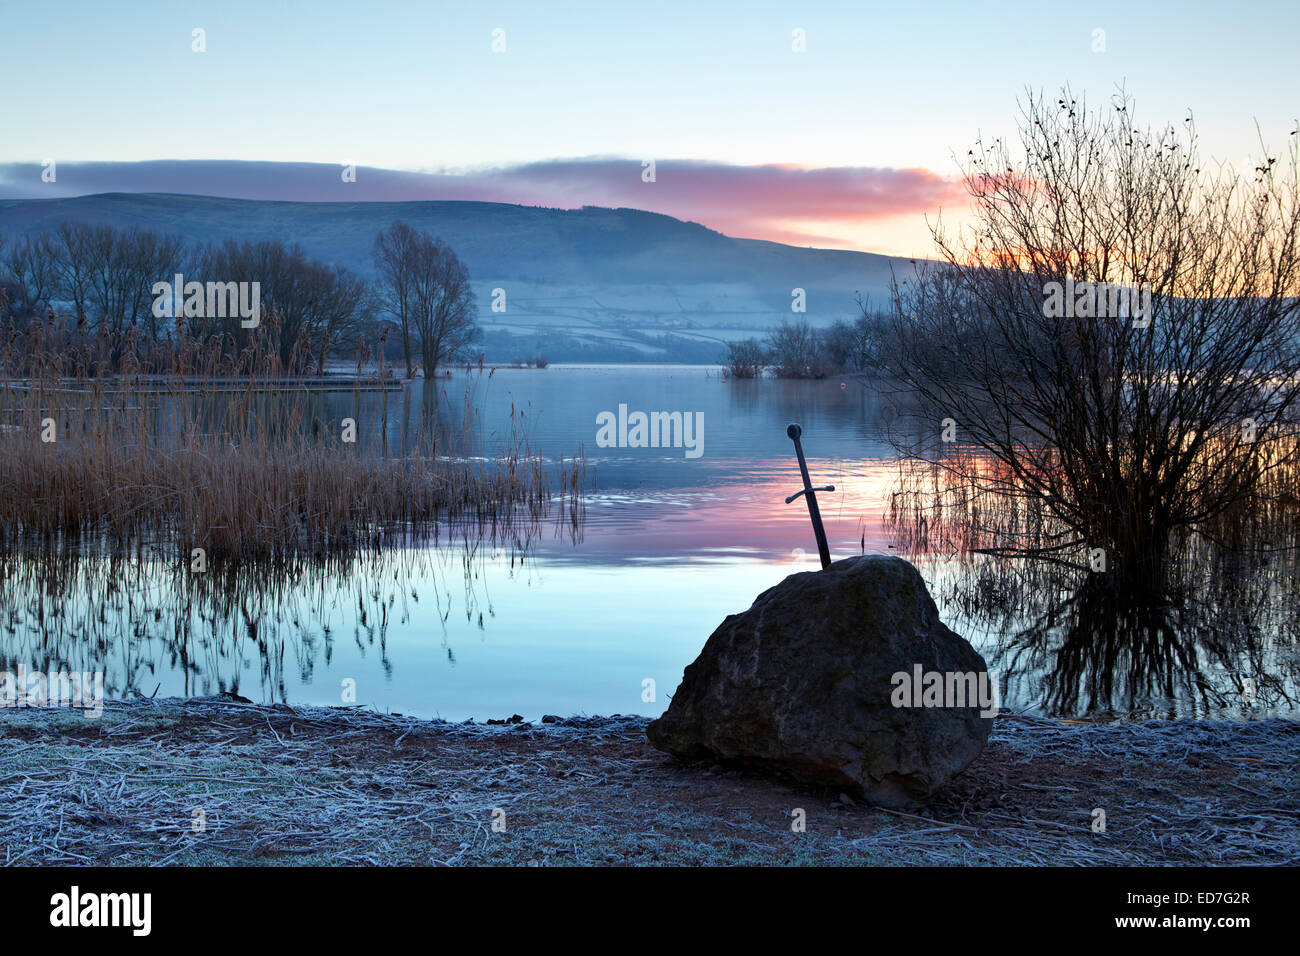 Sword in the stone at Llangorse Lake, Brecon Beacons, Powys, Wales. Stock Photo